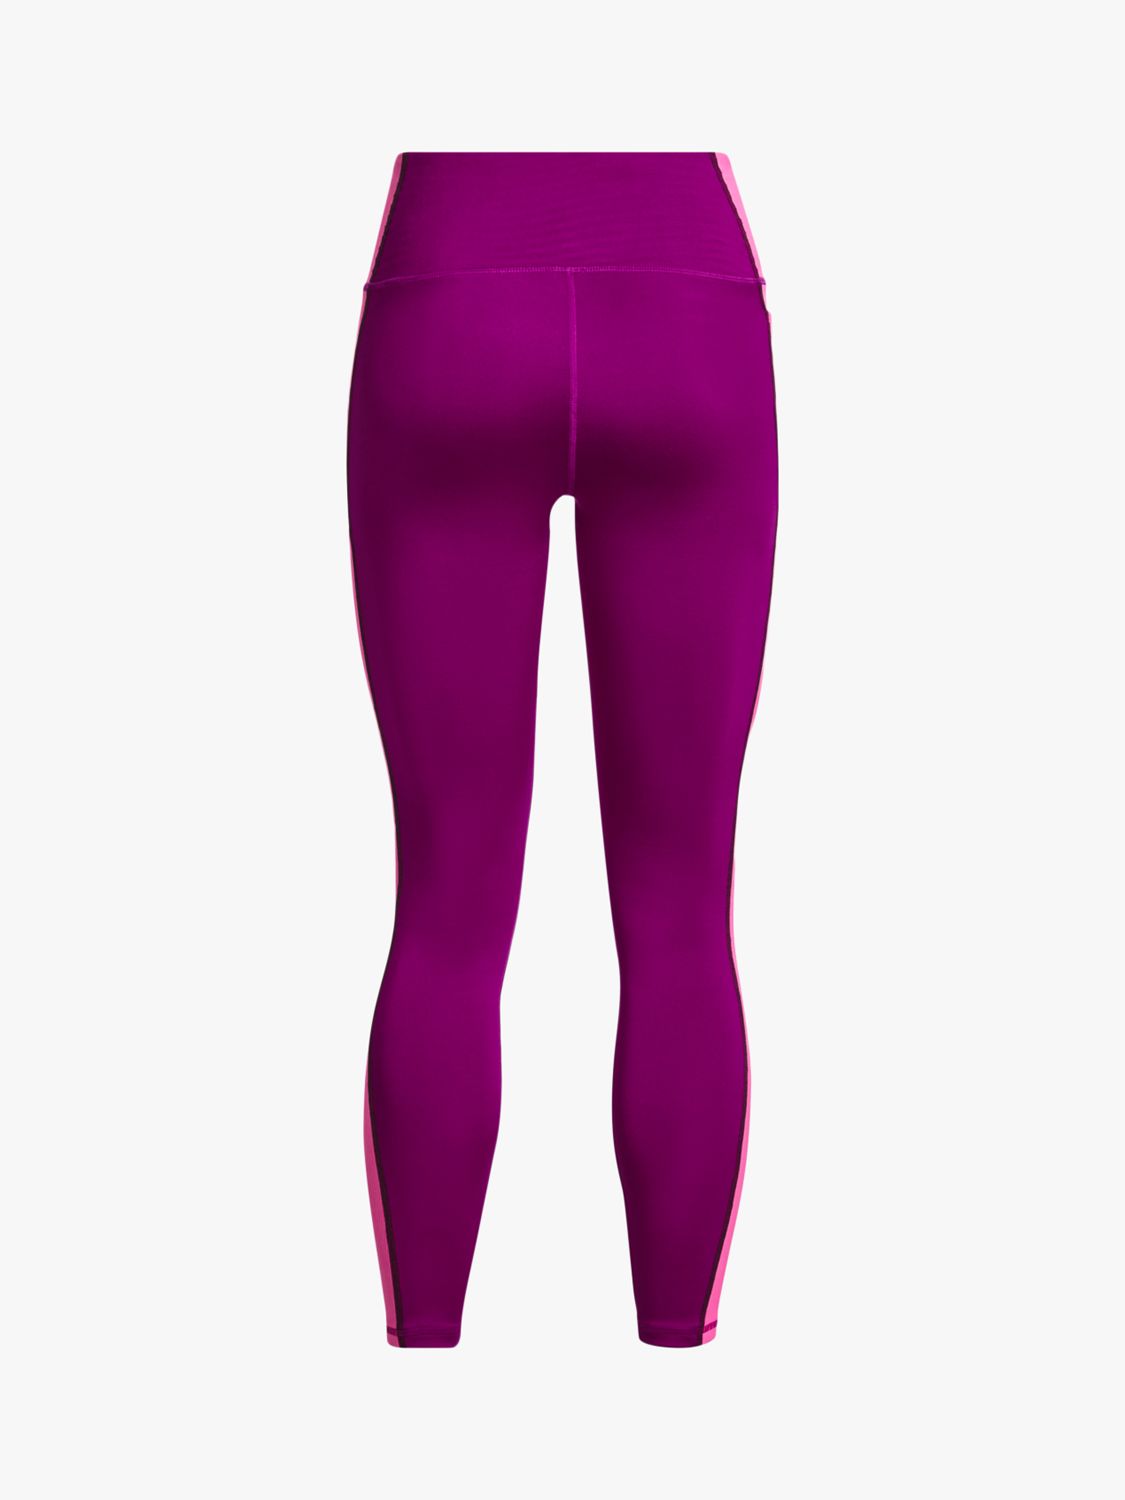 Under Armour Train Cold Weather Gym Leggings, Magenta/Pink/Black, XS